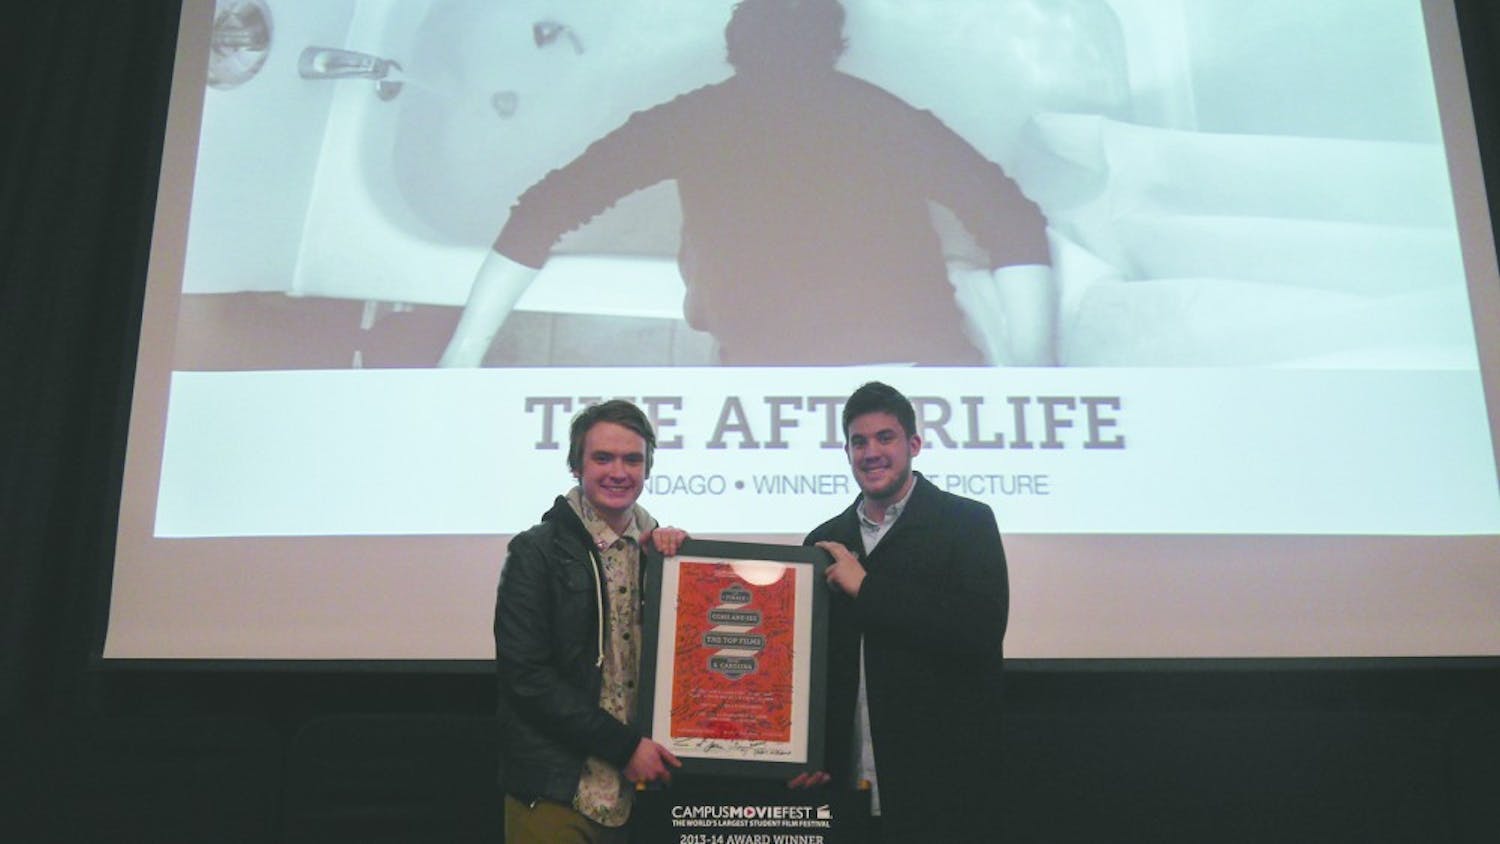 	Out of 133 entrees, Ryan Magee and Daniel Kyre, whose YouTube account has over 49,000 subscribers, won best picture for their short film &#8216;The Afterlife.&#8217;